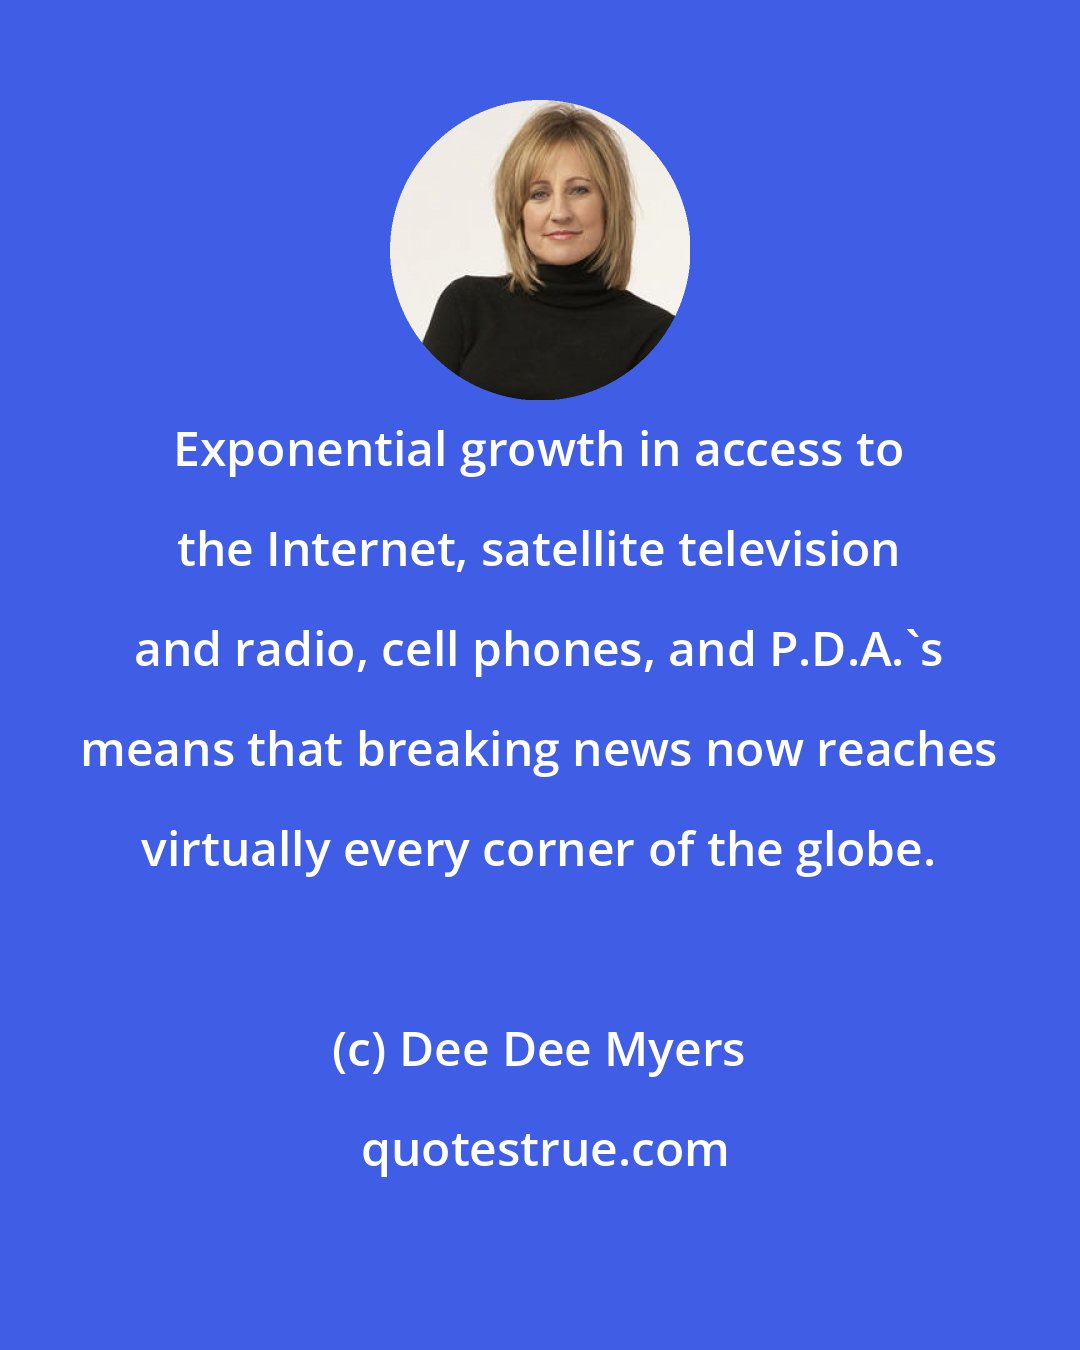 Dee Dee Myers: Exponential growth in access to the Internet, satellite television and radio, cell phones, and P.D.A.'s means that breaking news now reaches virtually every corner of the globe.